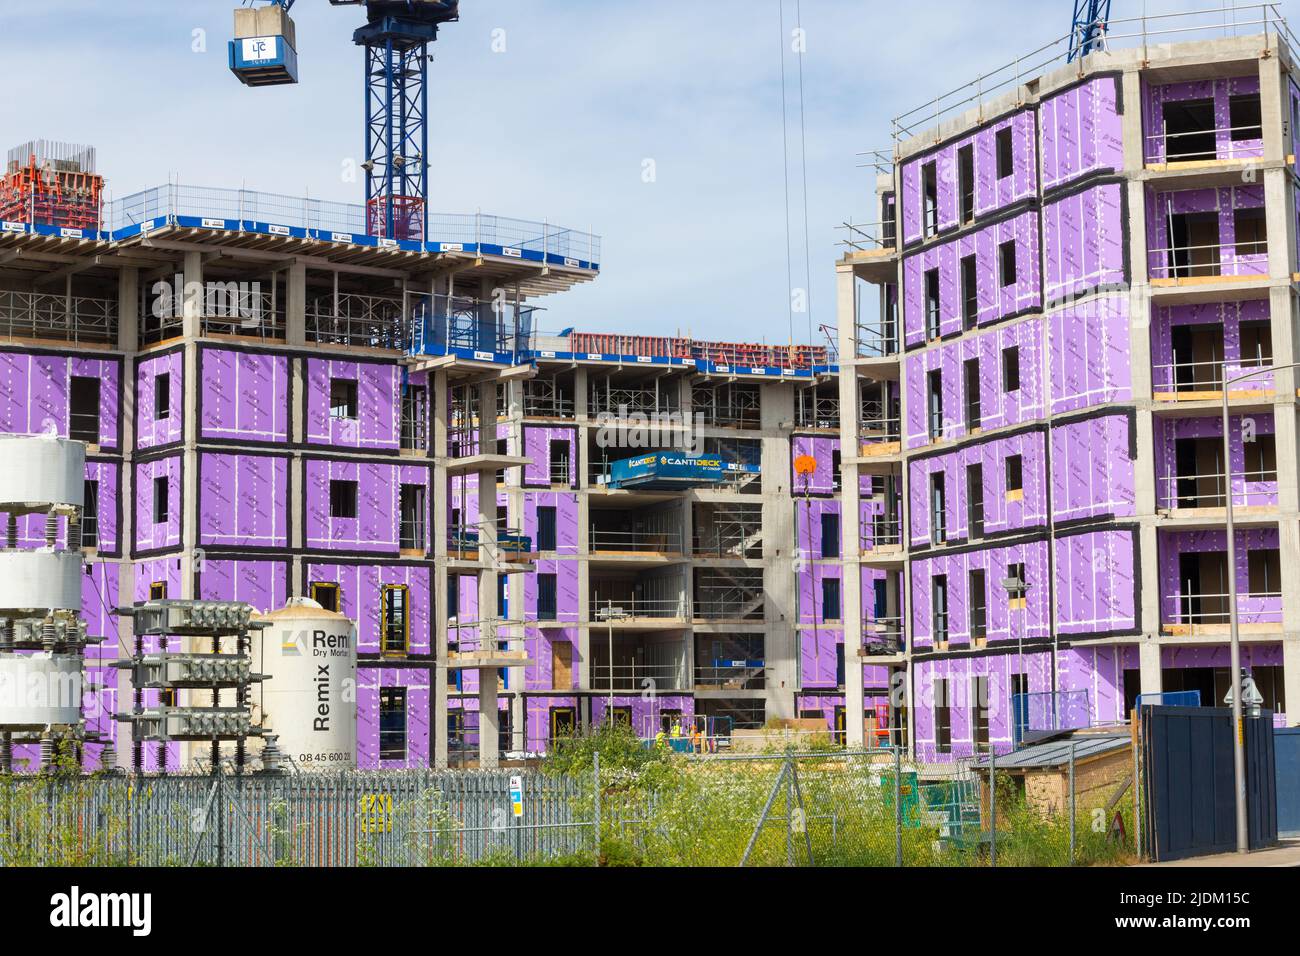 Construction site, new tower apartment buildings, siniat weather defence purple wrap over building, ashford, kent, uk Stock Photo